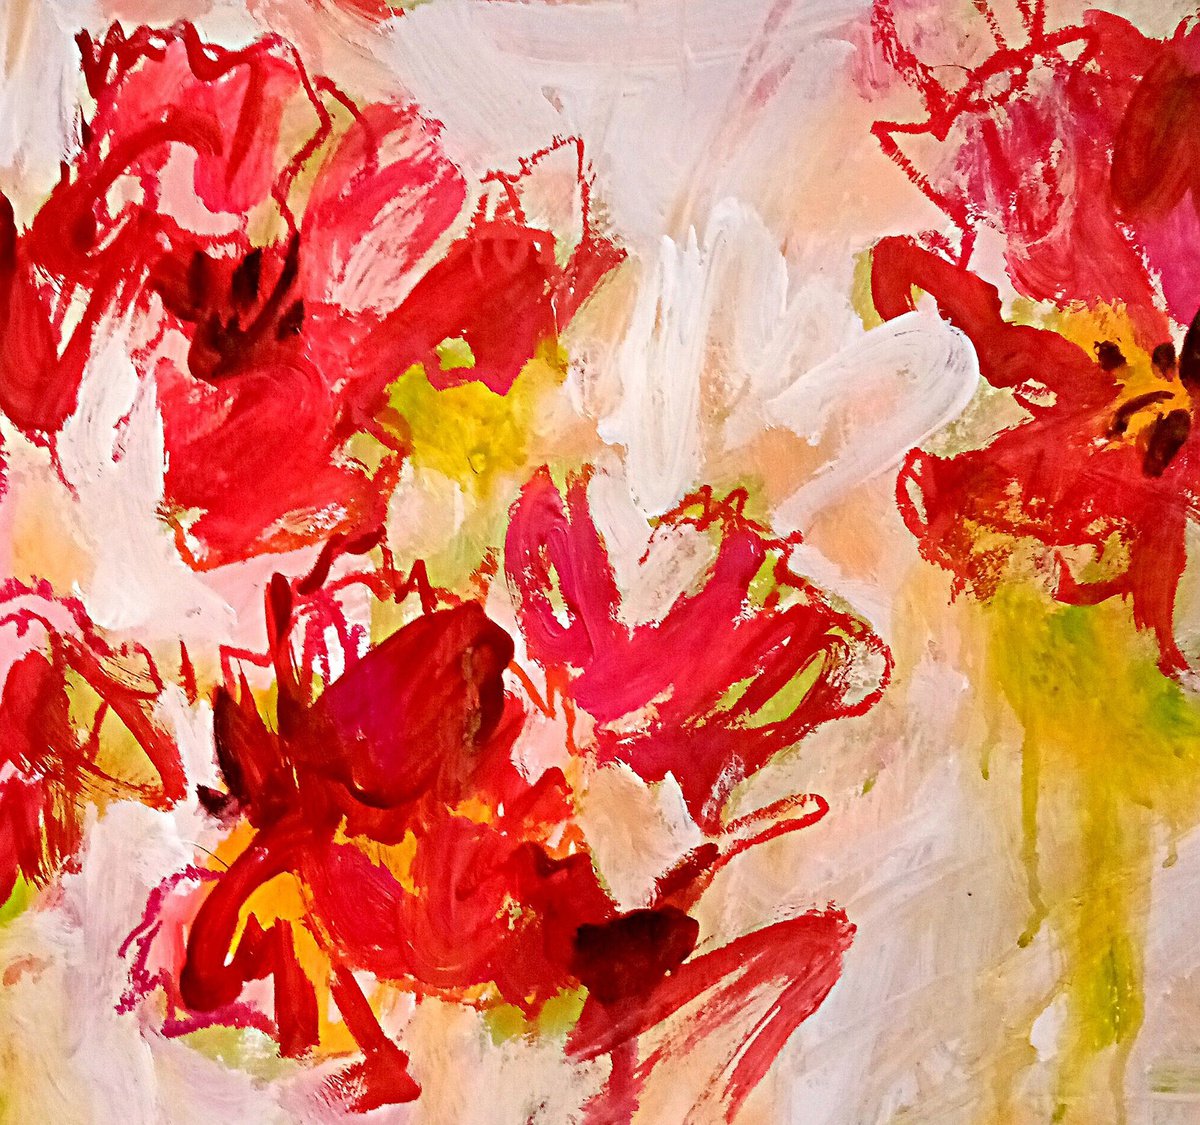 Abstract Red tulips#4/2022 by Valerie Lazareva